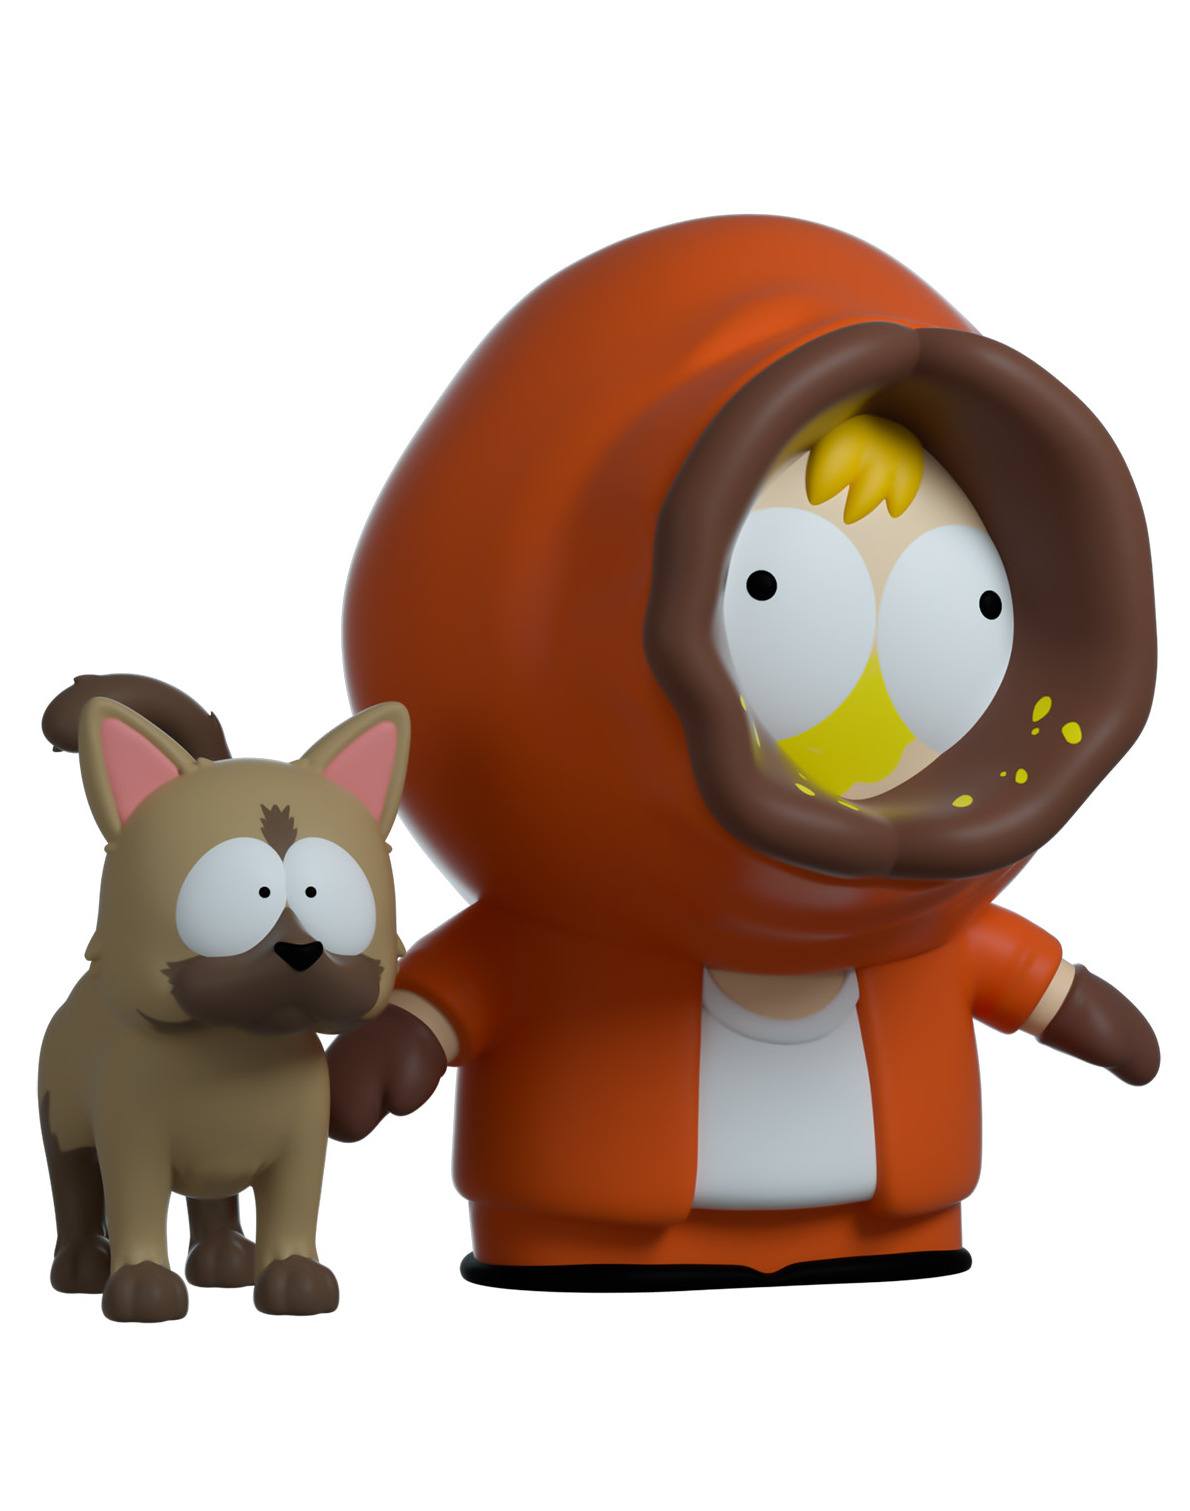 Figurka South Park - Cheesing Kenny (Youtooz South Park 0)